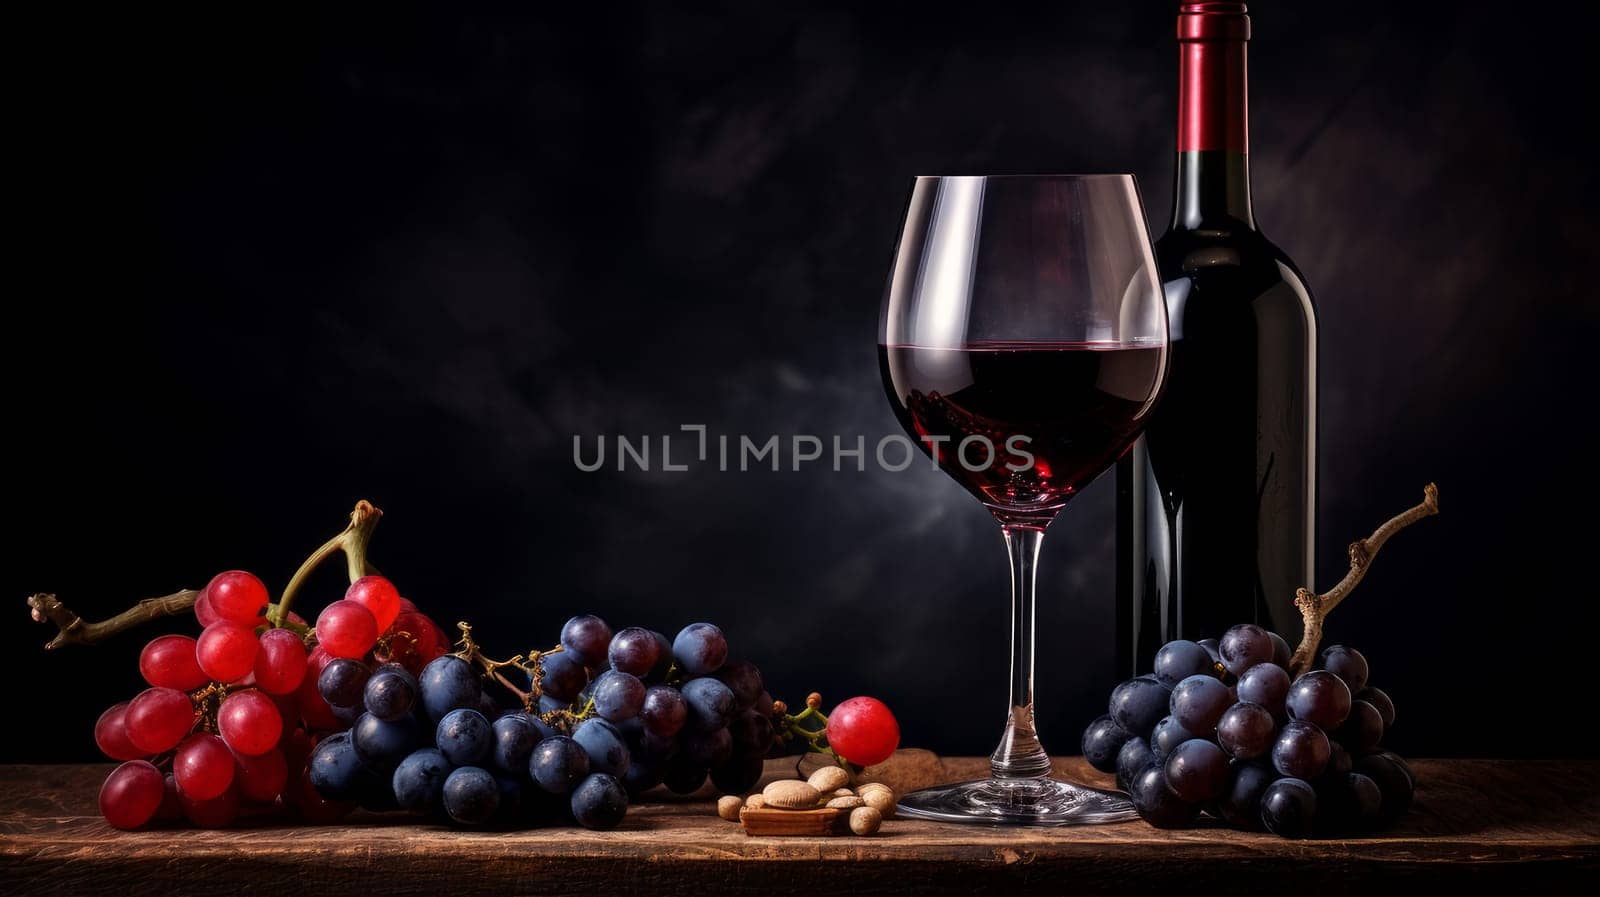 Refined still life with red wine, cheese and grapes on a wicker tray on a wooden table on a dark background. Wine making, vineyards, tourism business, small and private business, chain restaurant, flavorful food and drinks